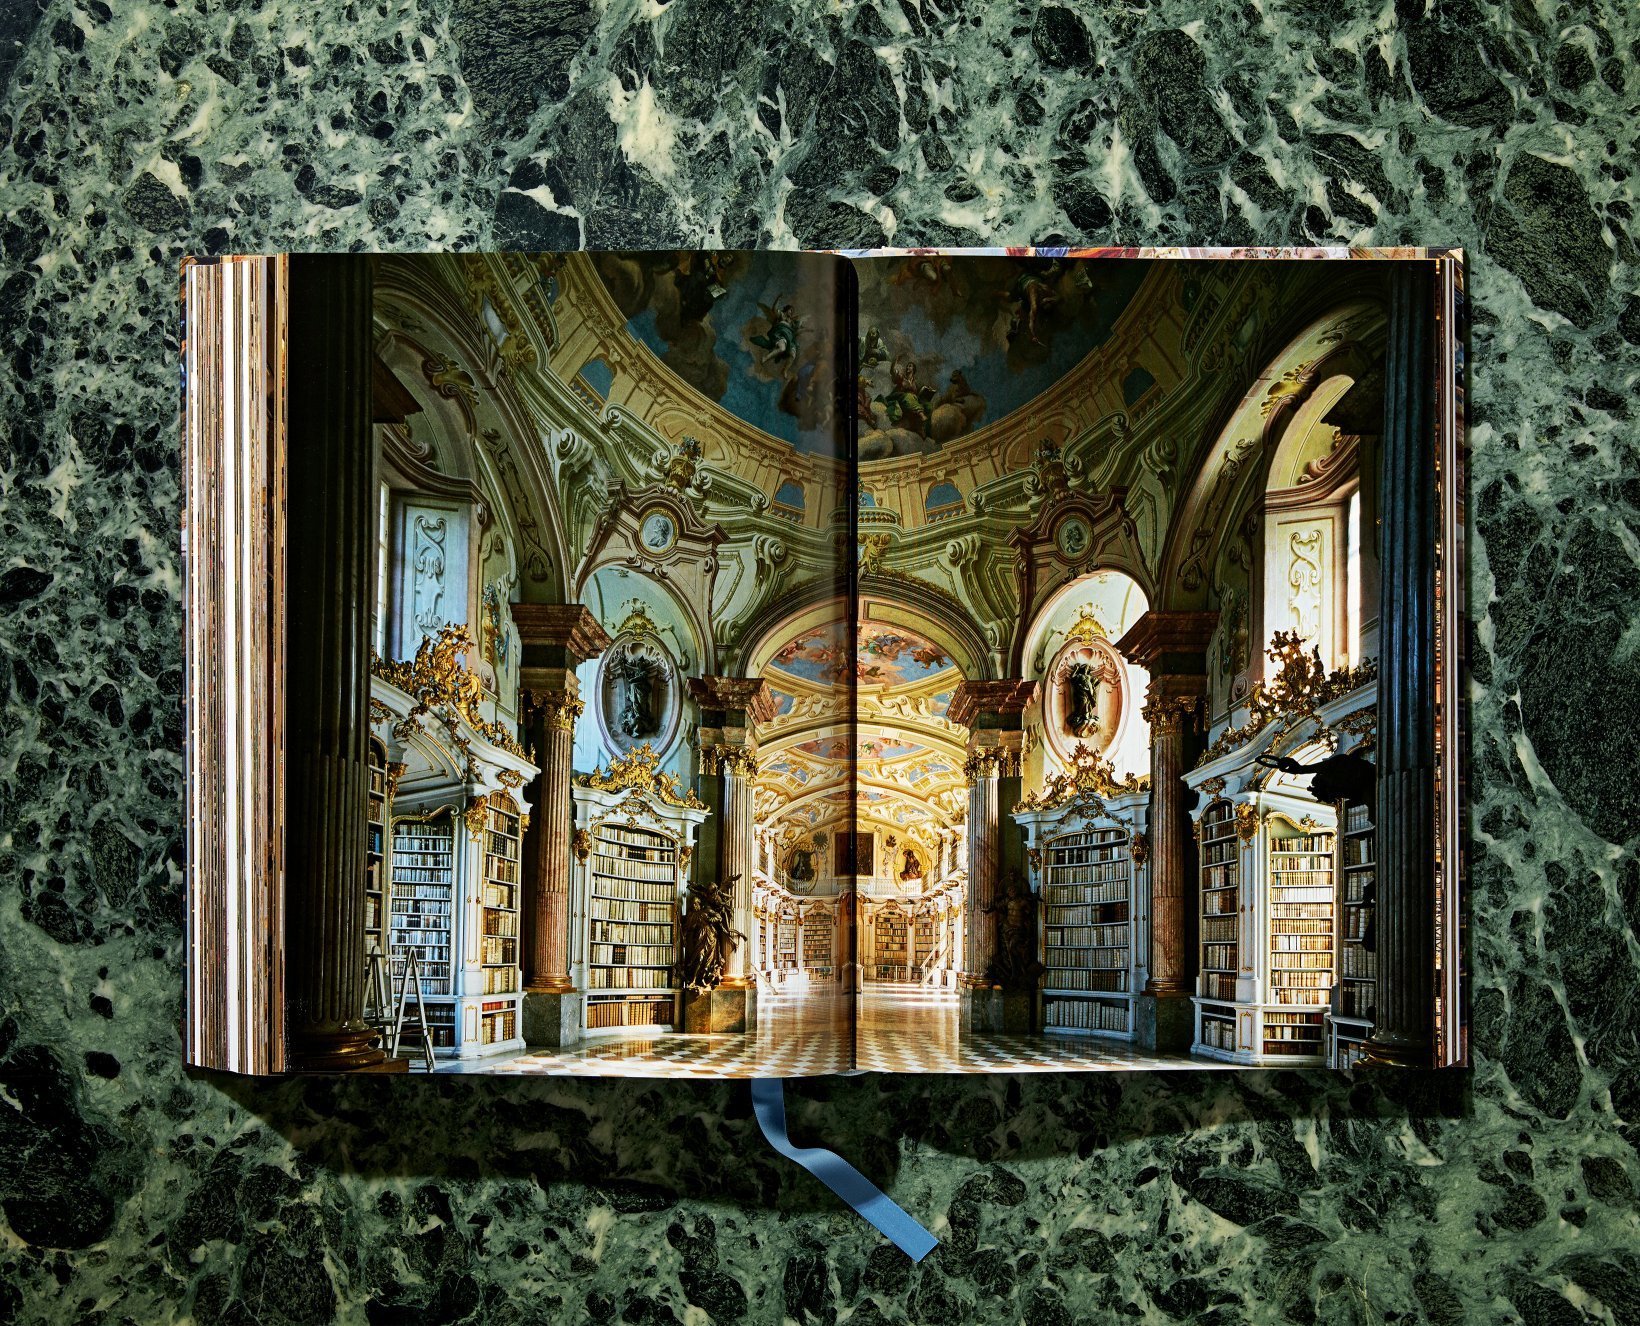 Massimo Listri. The World's Most Beautiful Libraries